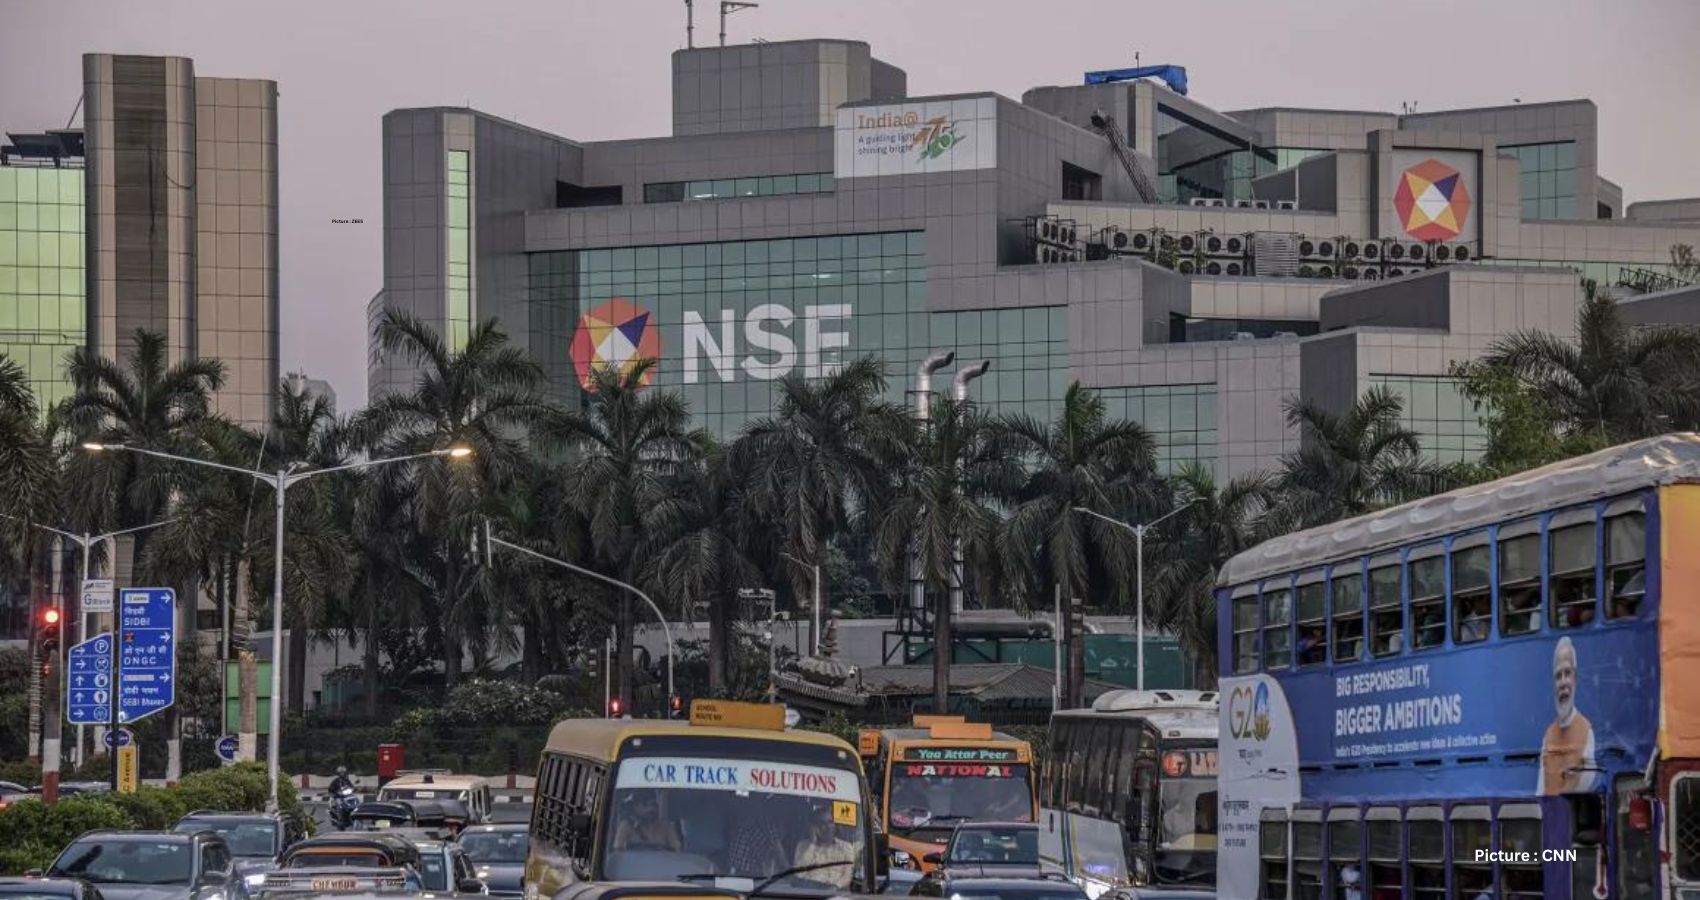 Featured & Cover Surge in International Interest as India's Stock Market Hits Record Highs